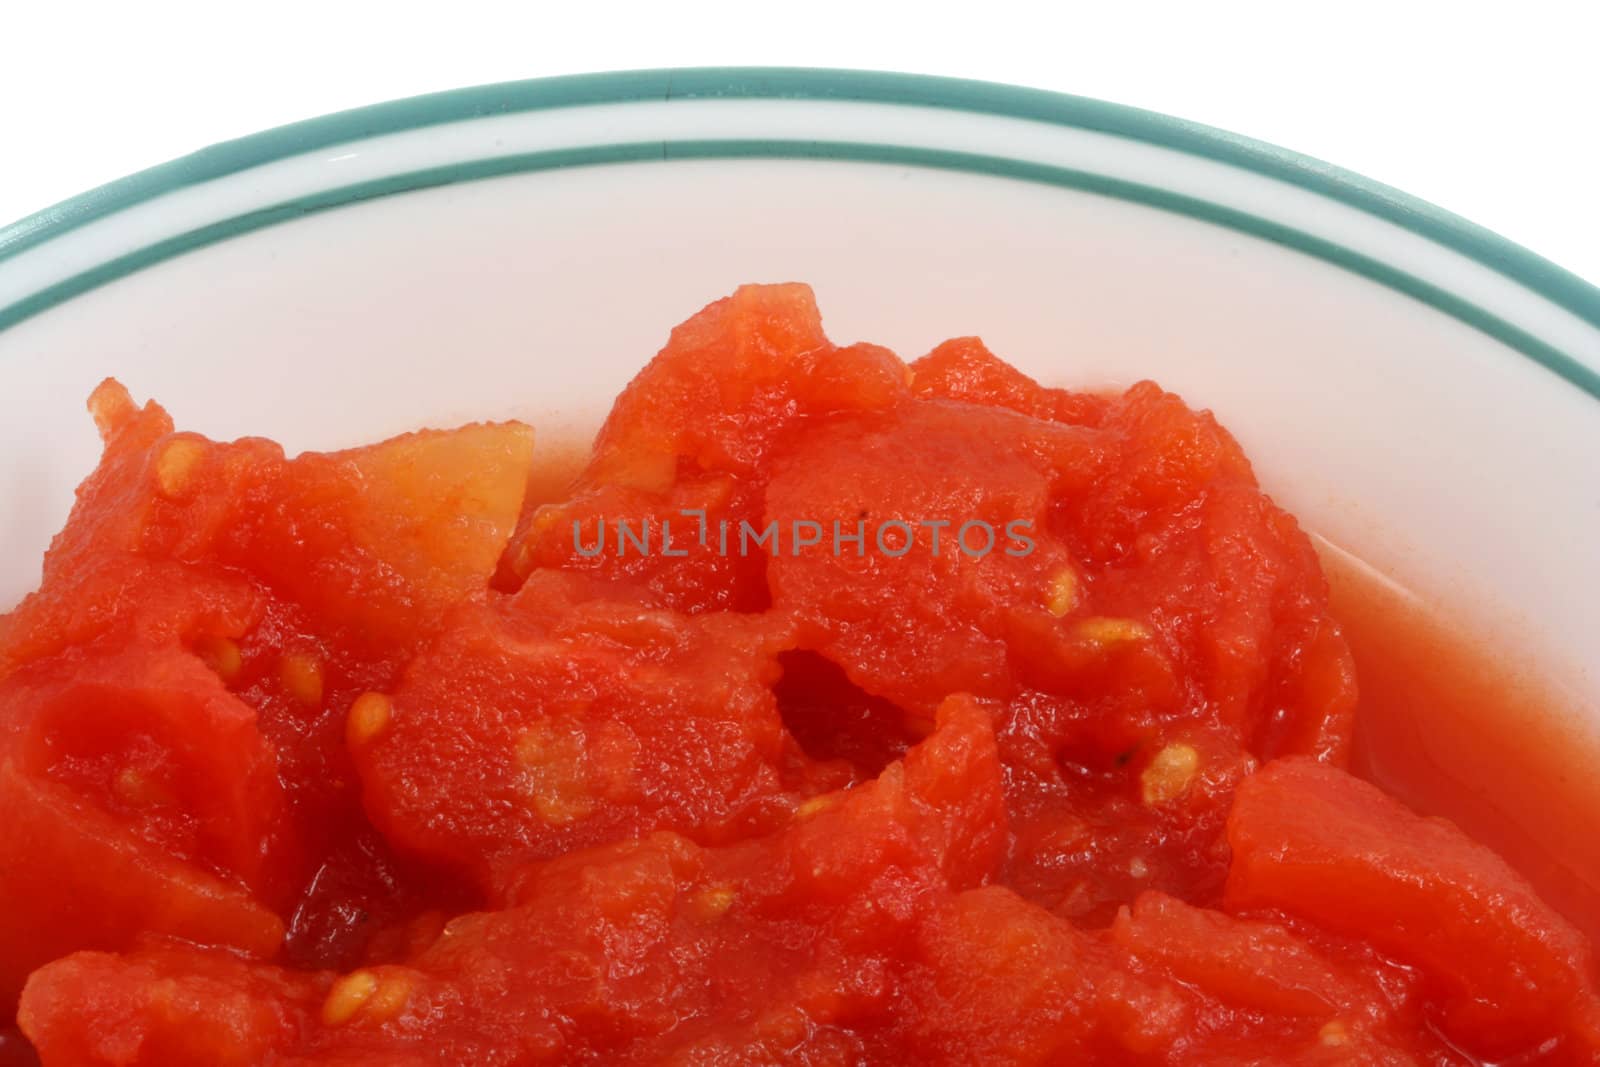 Diced tomatoes in a bowl